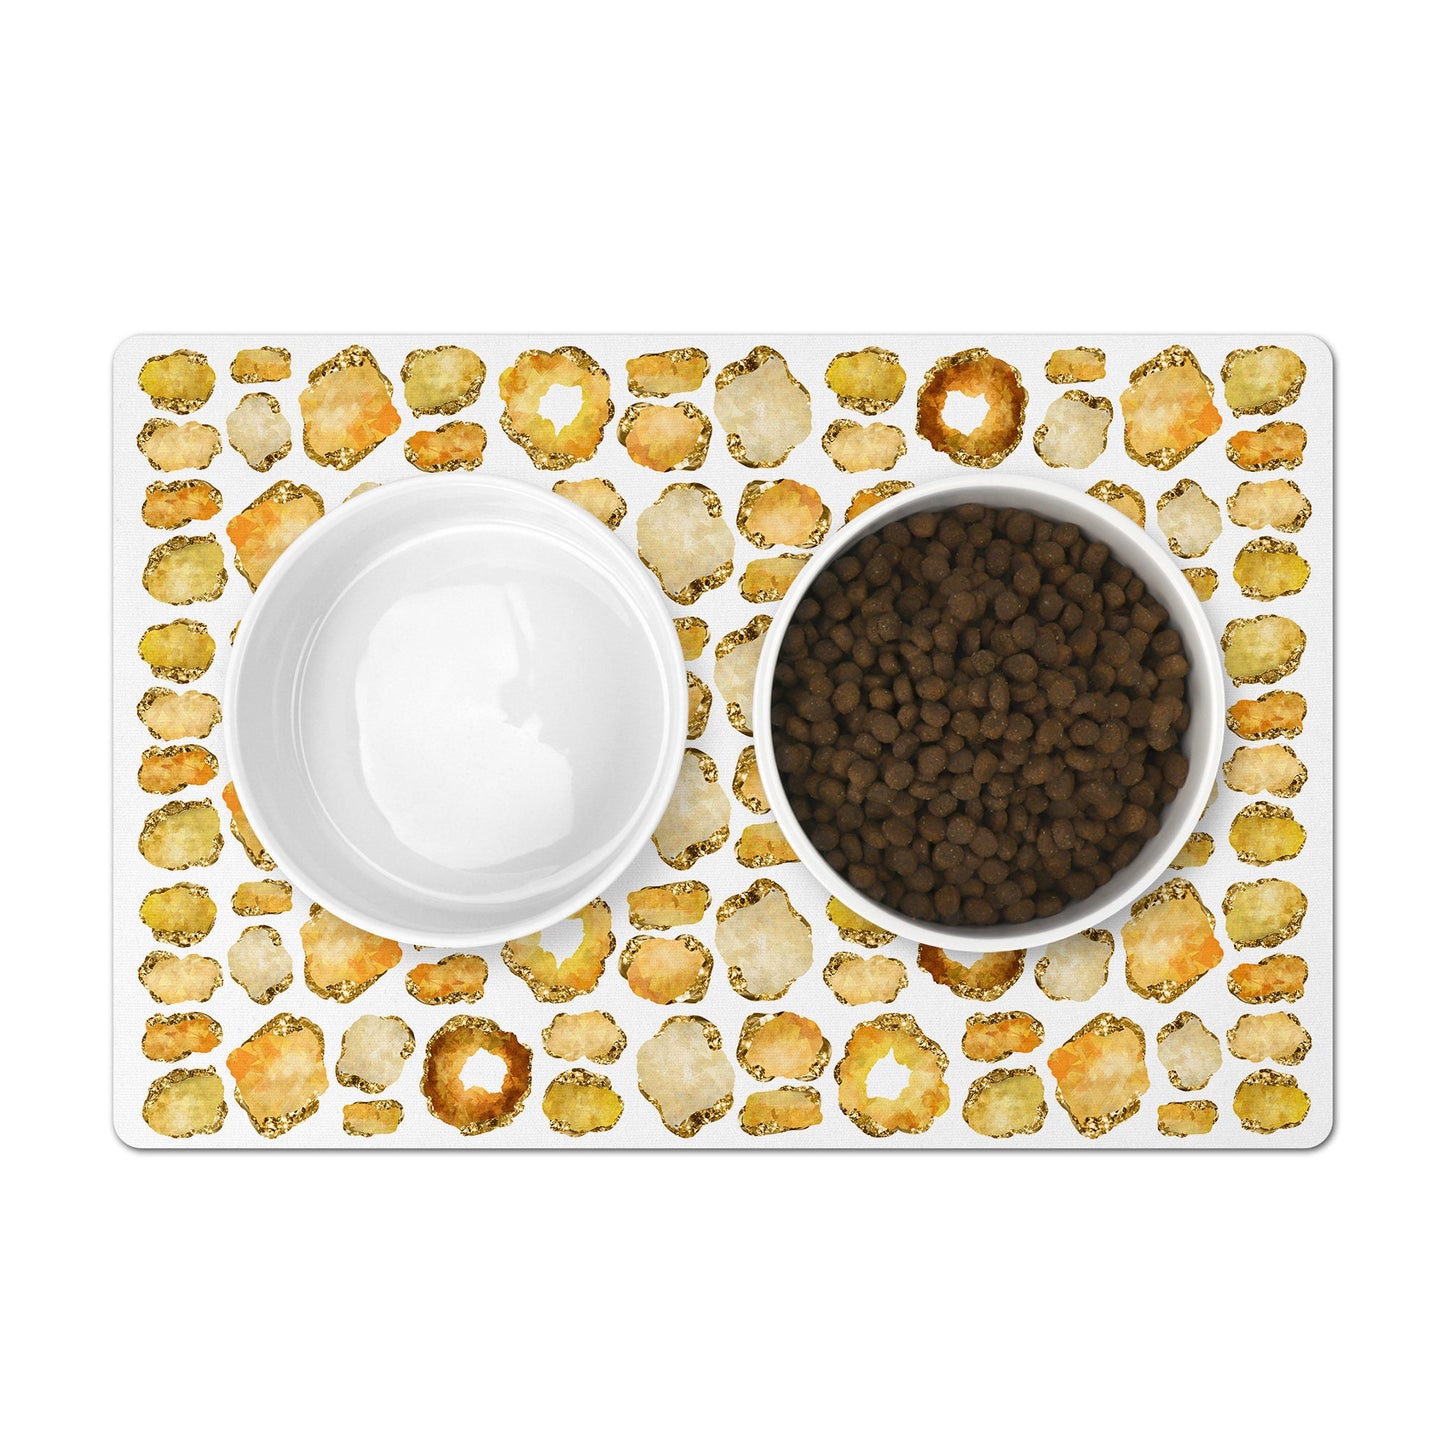 Pet food mat with yellow citrine jewel print for pet bowls.